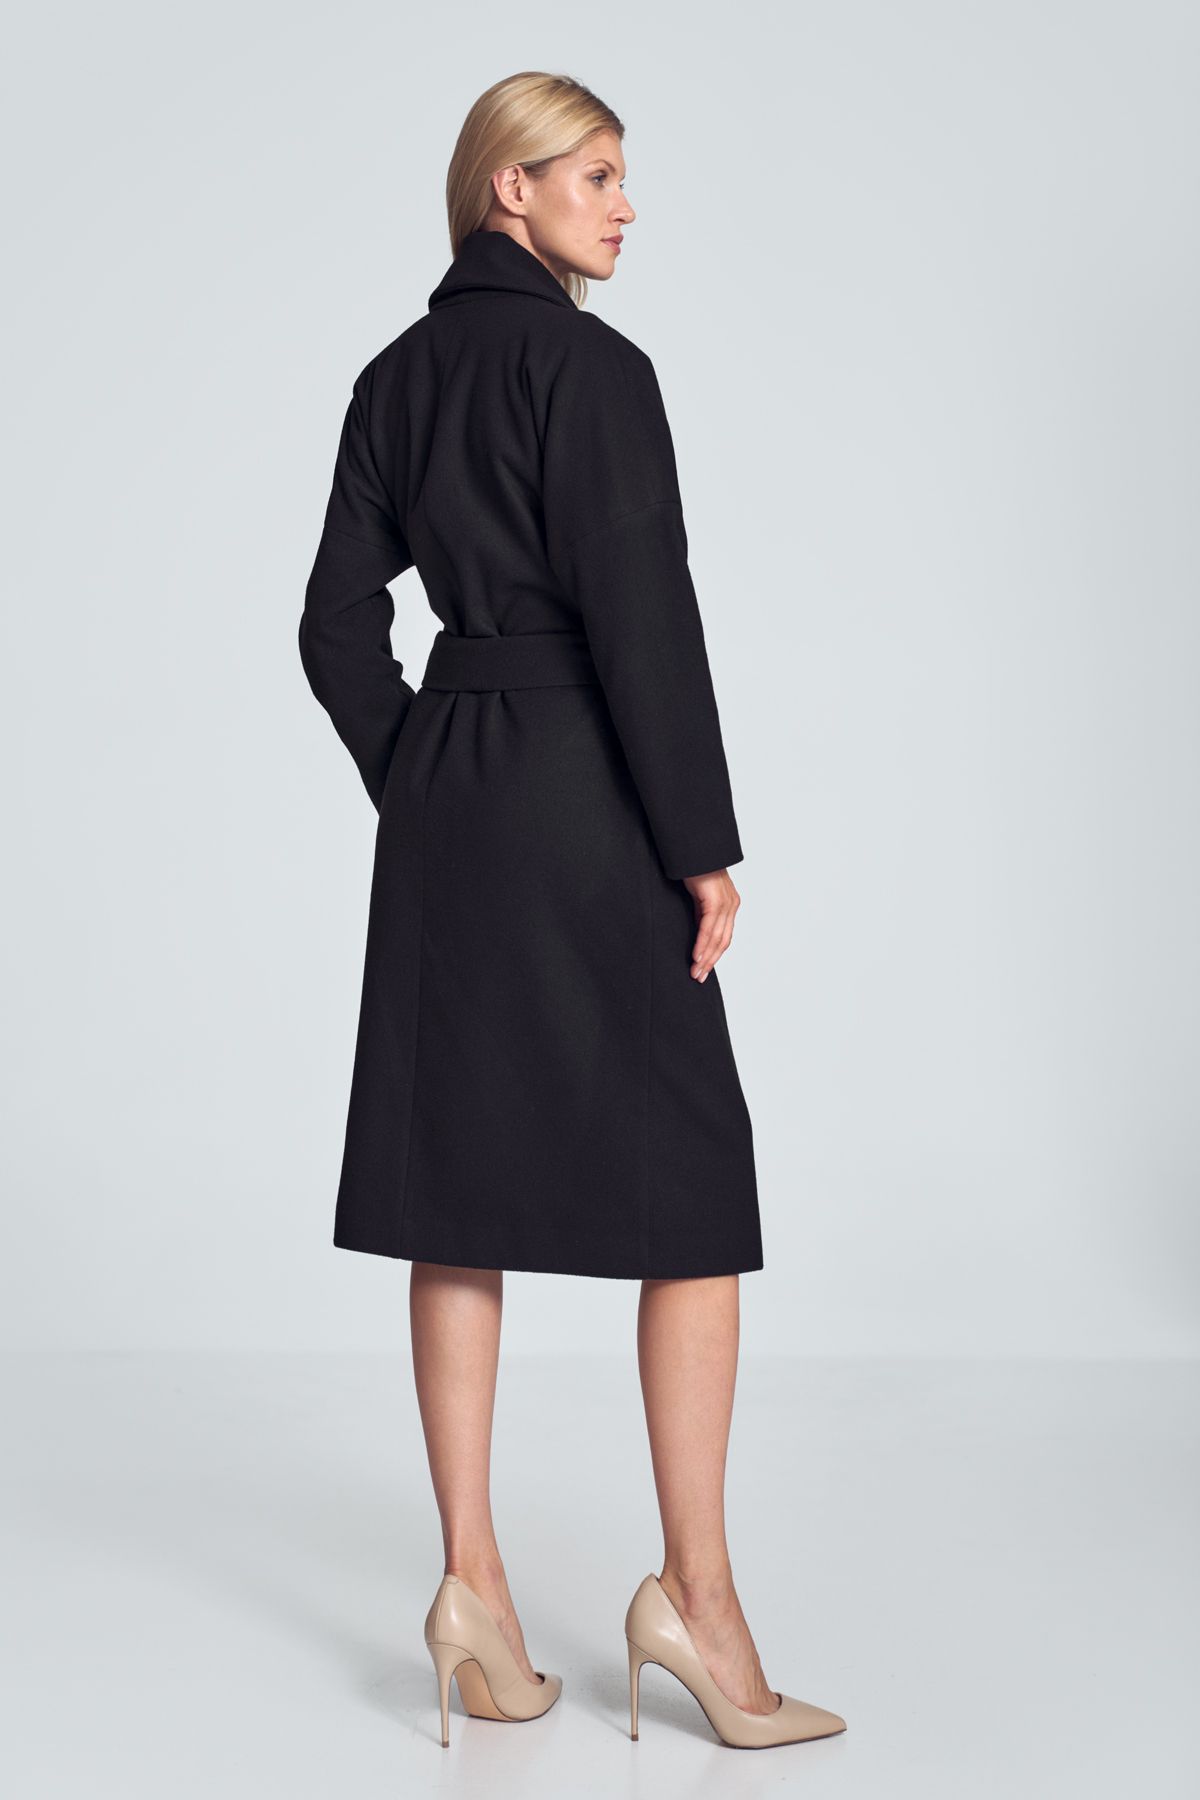 Black autumn coat, 7/8 length, with a large loose collar with a lining, tied at the waist. Pockets in the side seams. The true size of this coat is S/M.